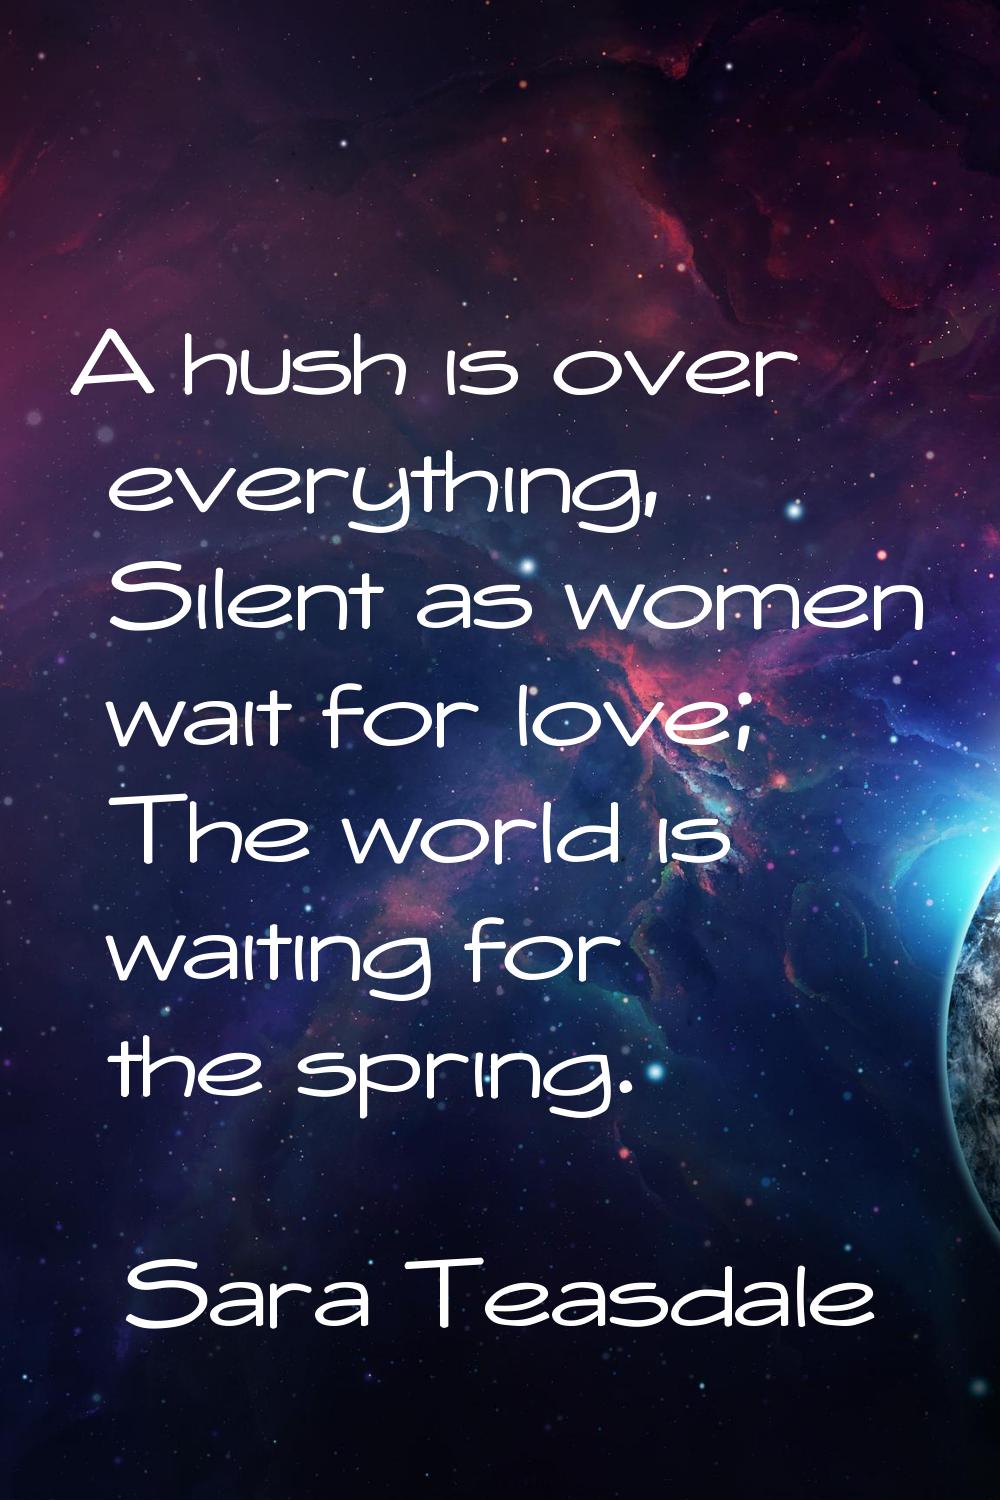 A hush is over everything, Silent as women wait for love; The world is waiting for the spring.